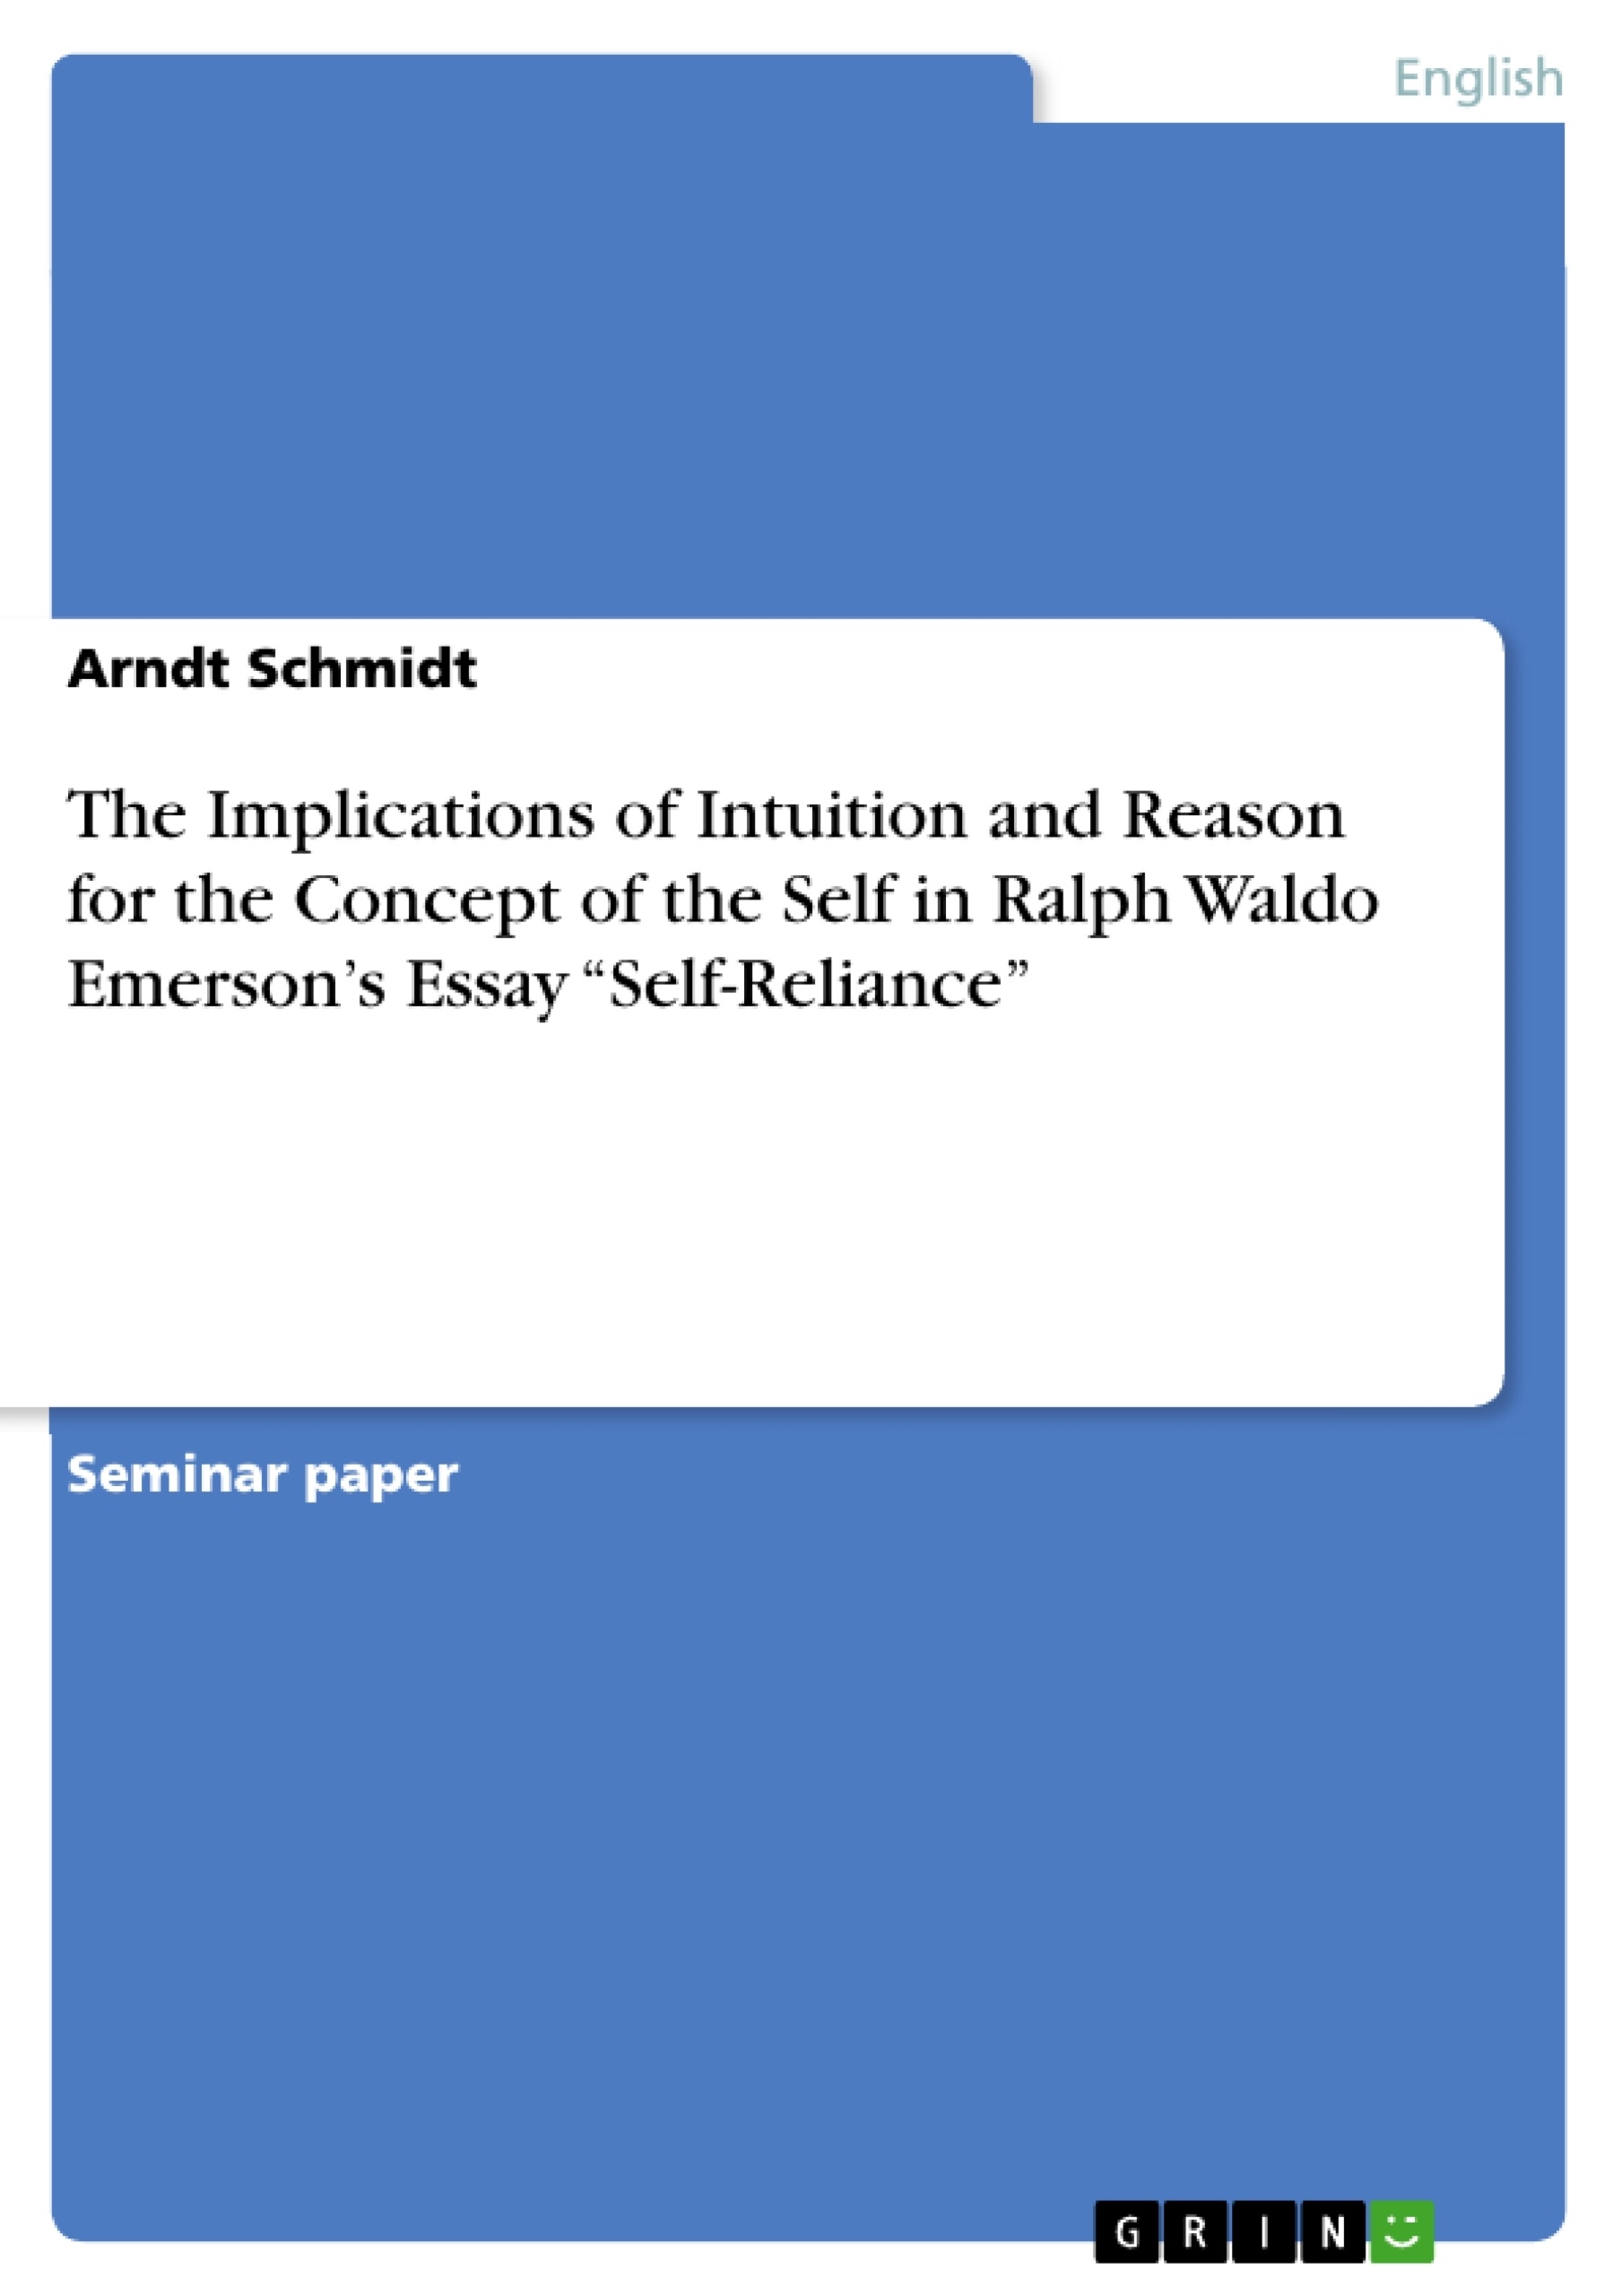 Title: The Implications of Intuition and Reason for the Concept of the Self in Ralph Waldo Emerson’s Essay “Self-Reliance”